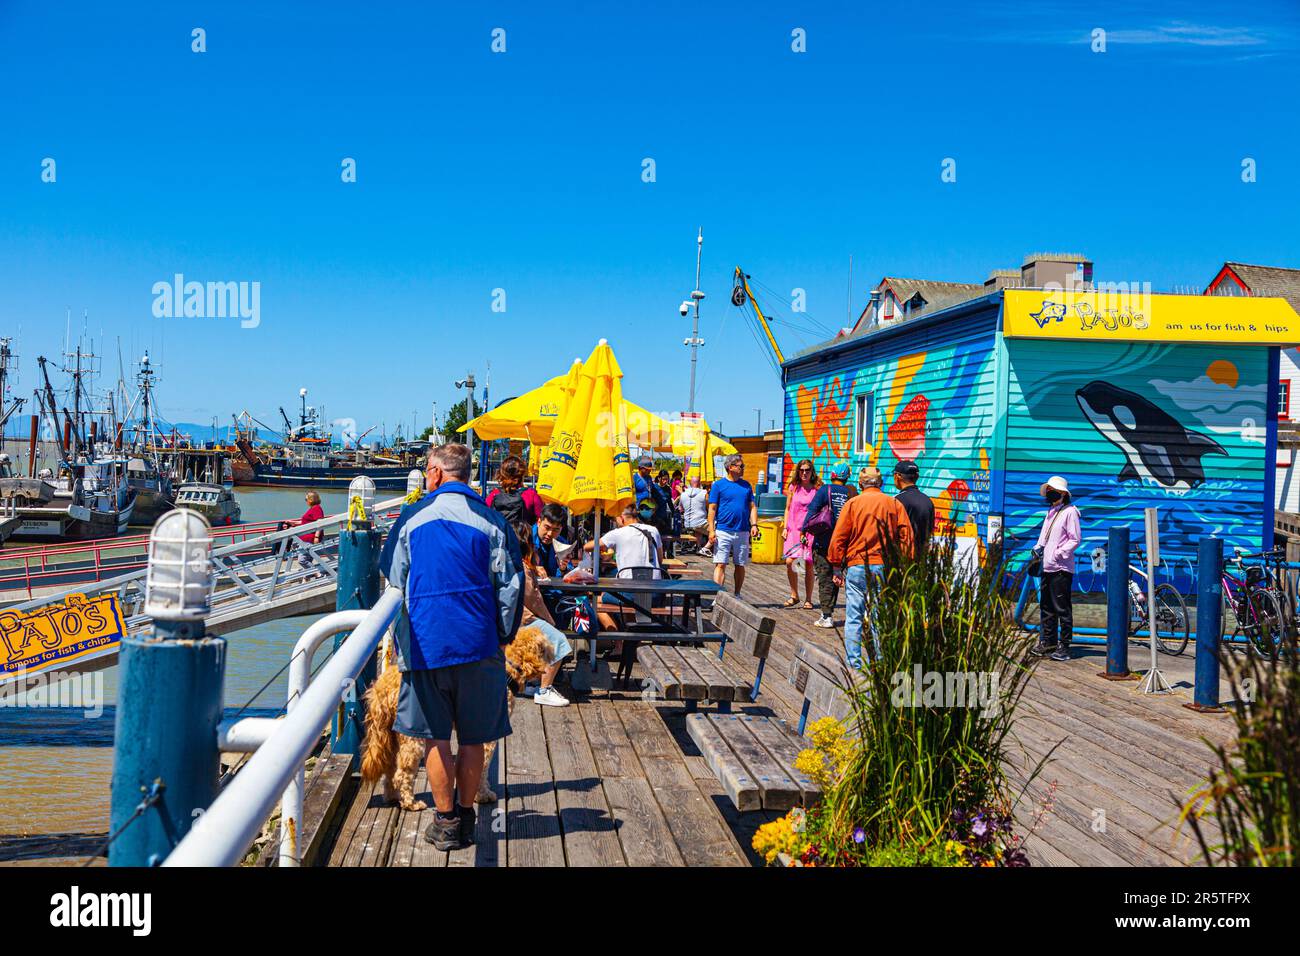 Busy day for Fish and Chips in Steveston British Columbia Canada Stock Photo